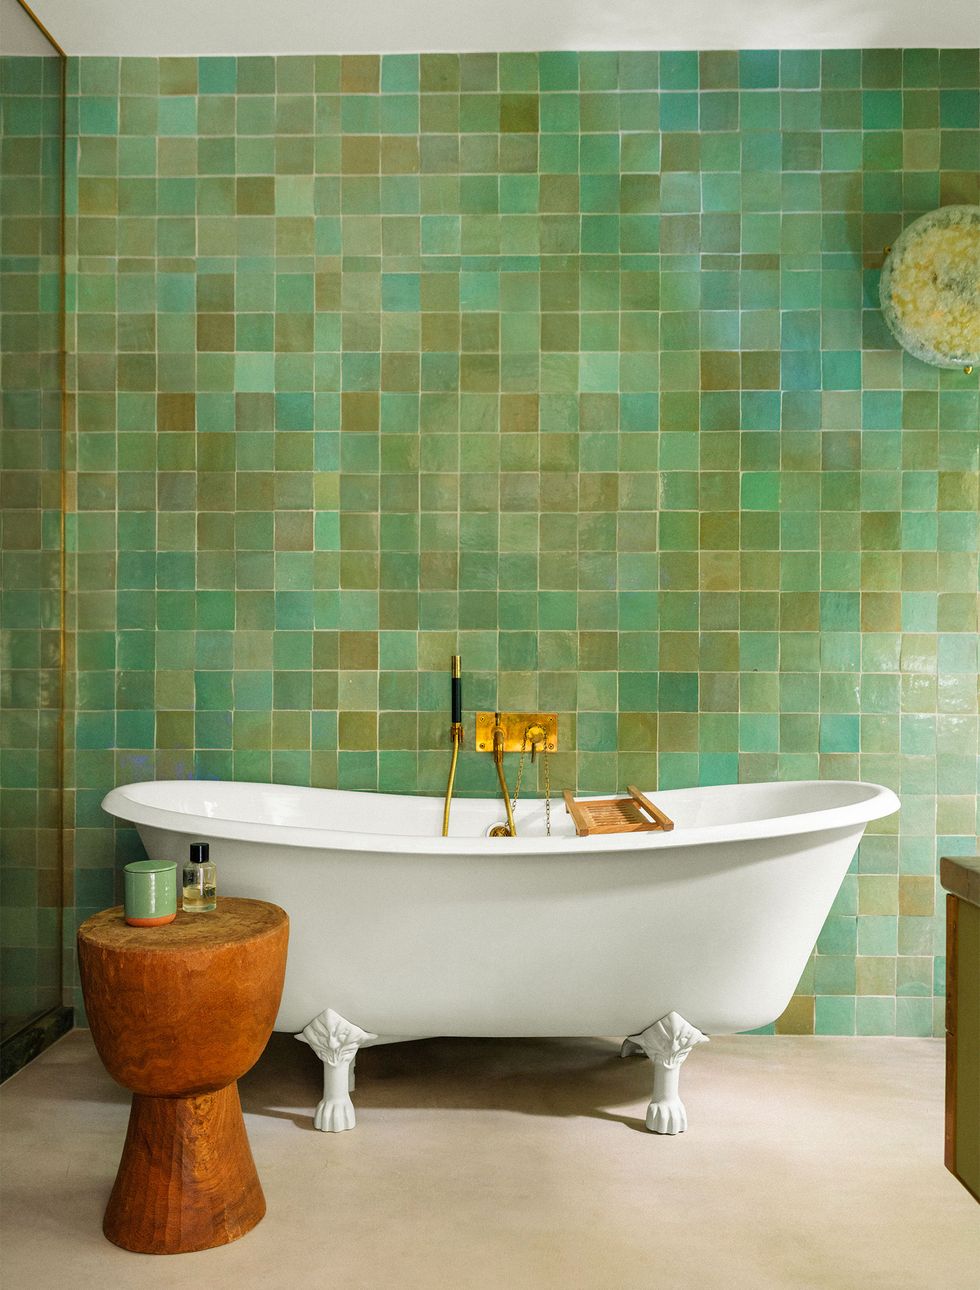 bathroom with white claw foot tub and stump like wooden table and a wall of tiles in multiple shades of green